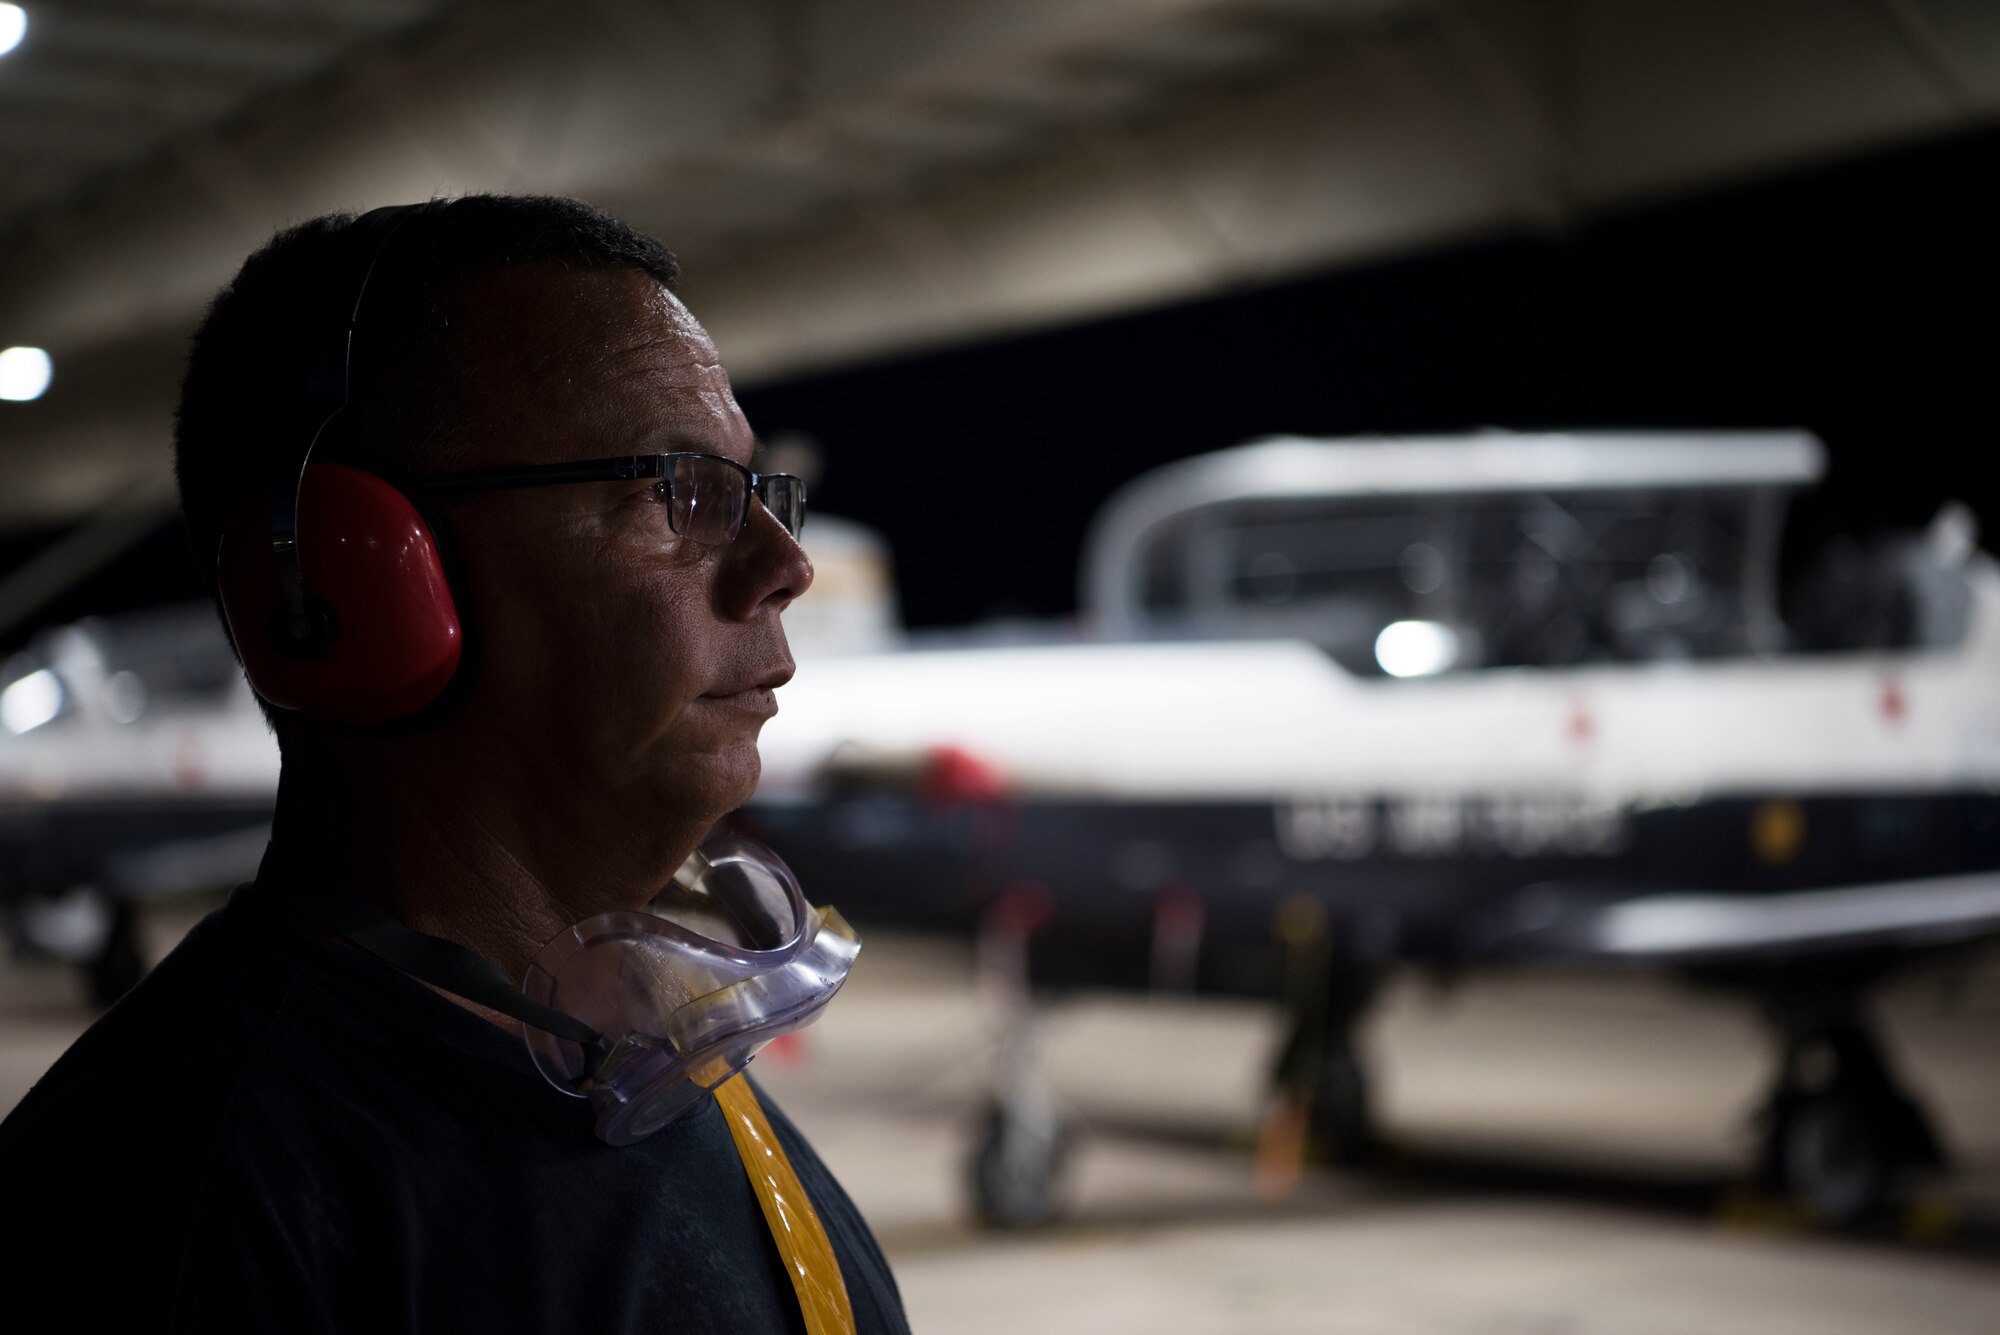 Art Ramirez, 47th Maintenance Directorate aircraft attendant gives a T-6A Texan II crew signals to prepare for takeoff, Sept. 18, 2019, at Laughlin Air Force Base, Texas. Night flying at a Specialized Undergraduate Pilot Training base allows not only more hours in the sky, but it also provides a variety experience so pilots can become accustomed to instrument flying. (U.S. Air Force photo by Senior Airman Marco A. Gomez)